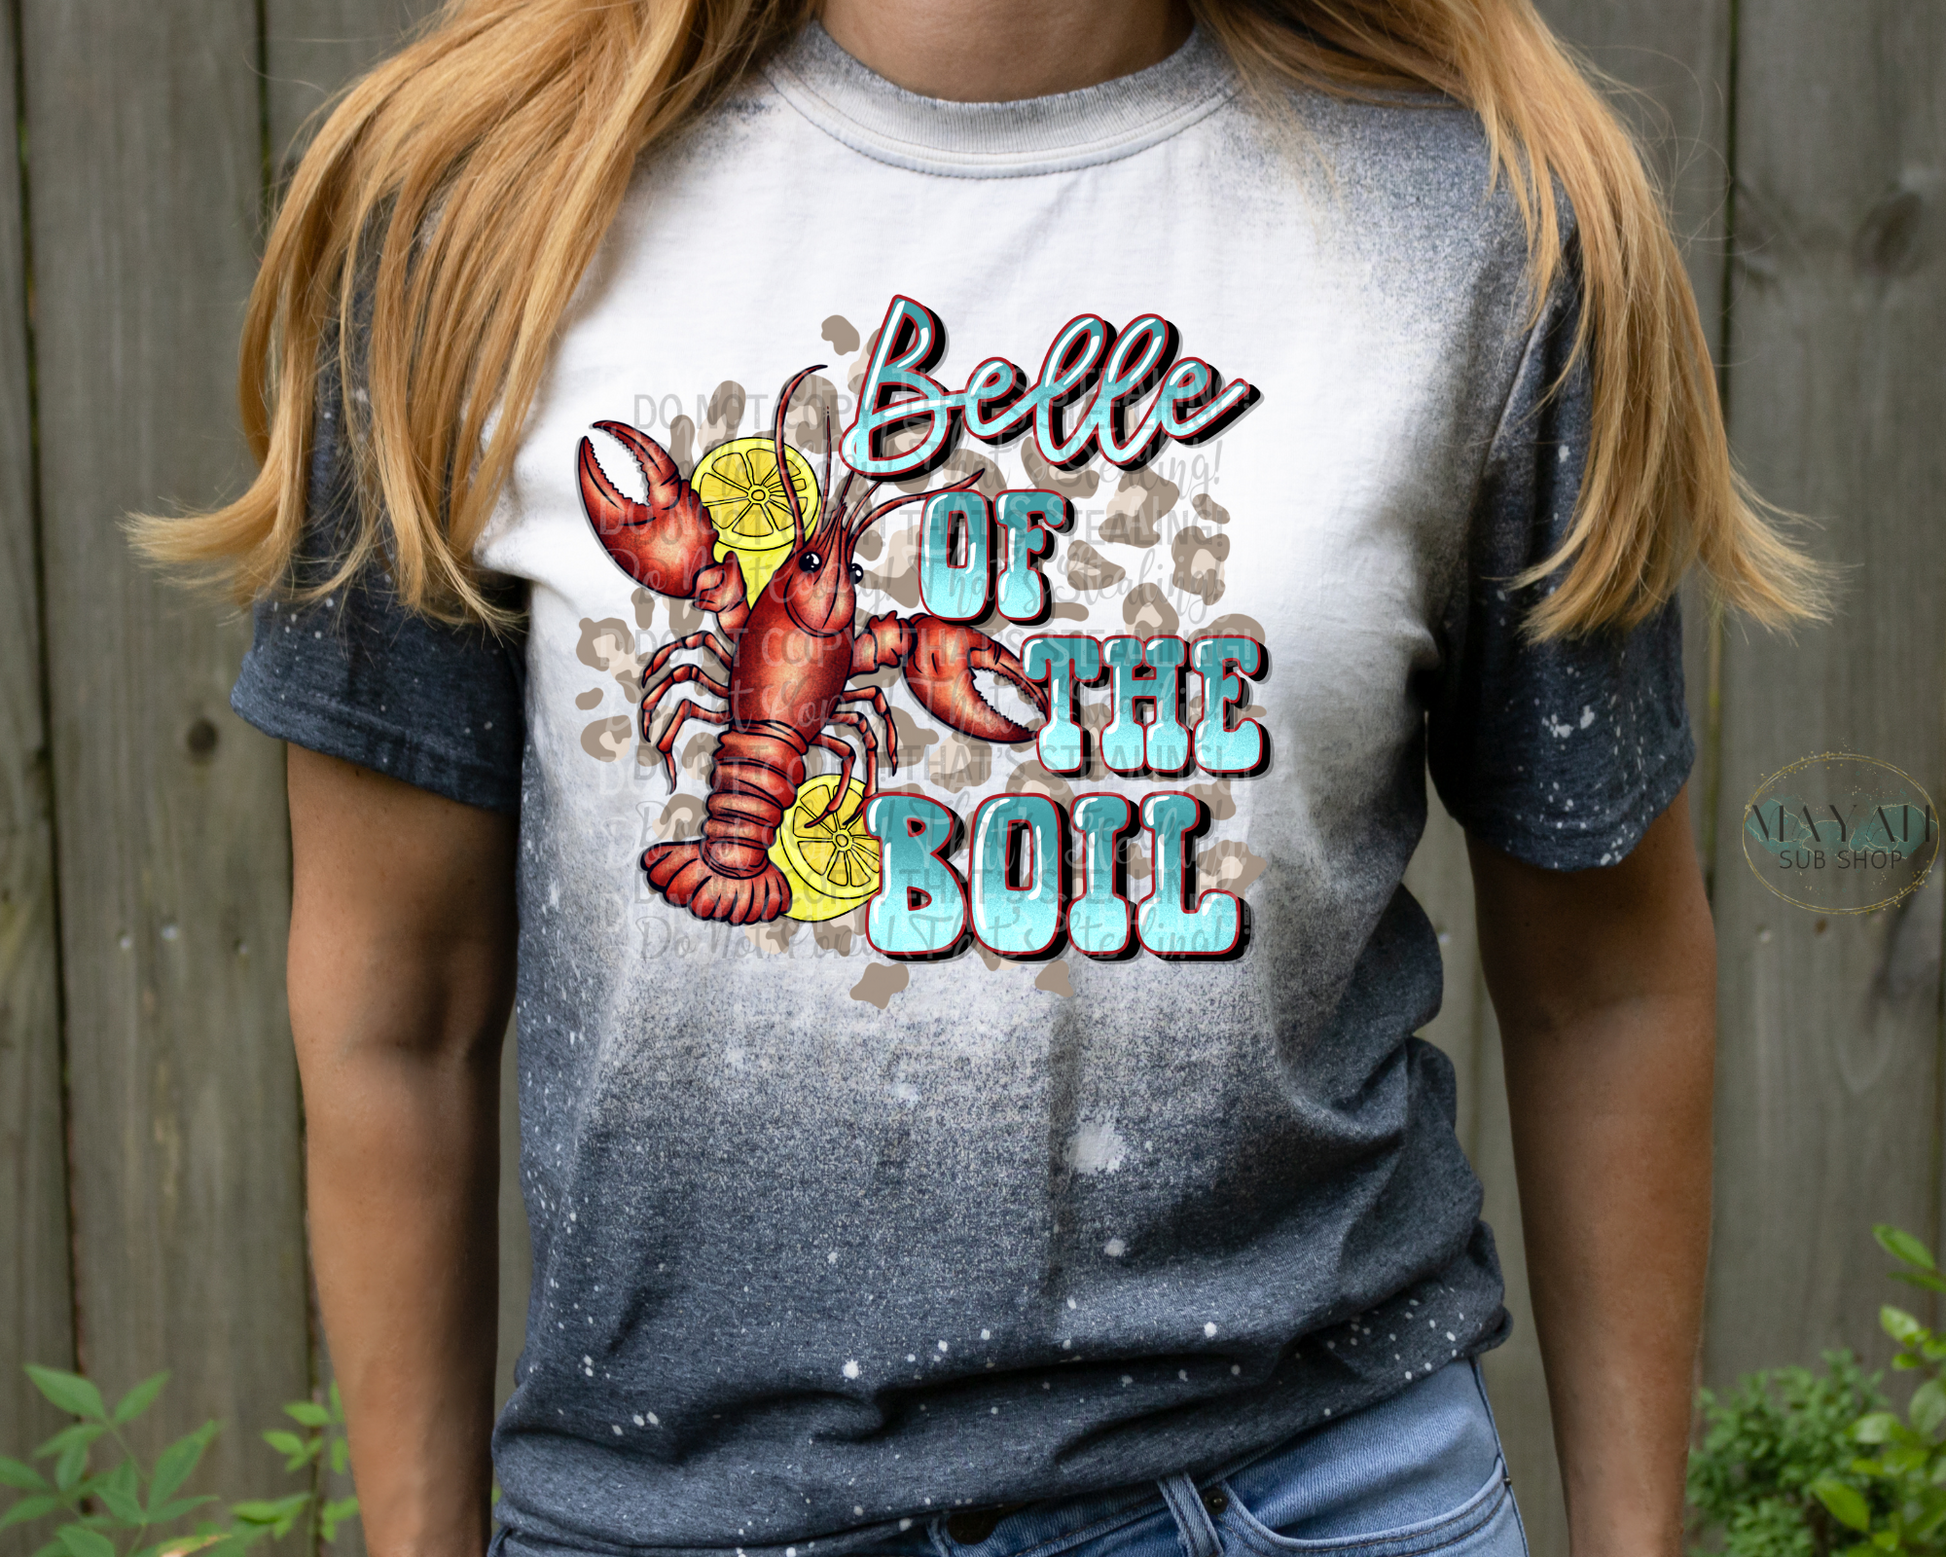 Belle of the boil shirt. -Mayan Sub Shop